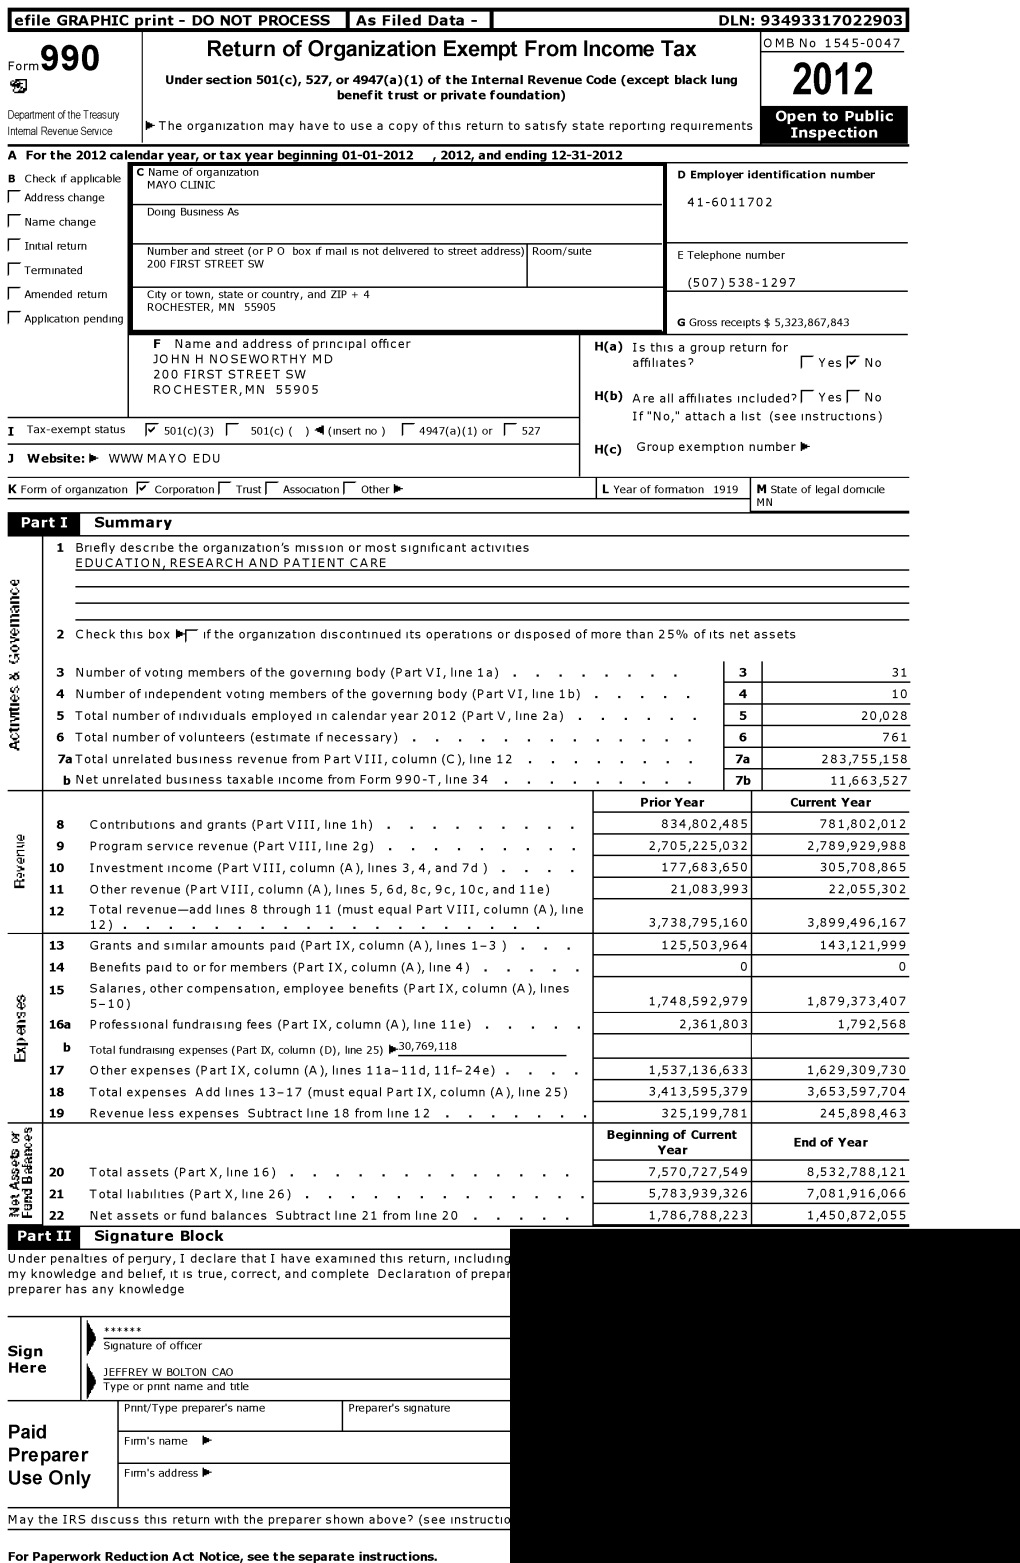 2012 Department of the Treasury Internal Revenue Service 1-The Organization May Have to Use a Copy of This Return to Satisfy State Reporting Requirements